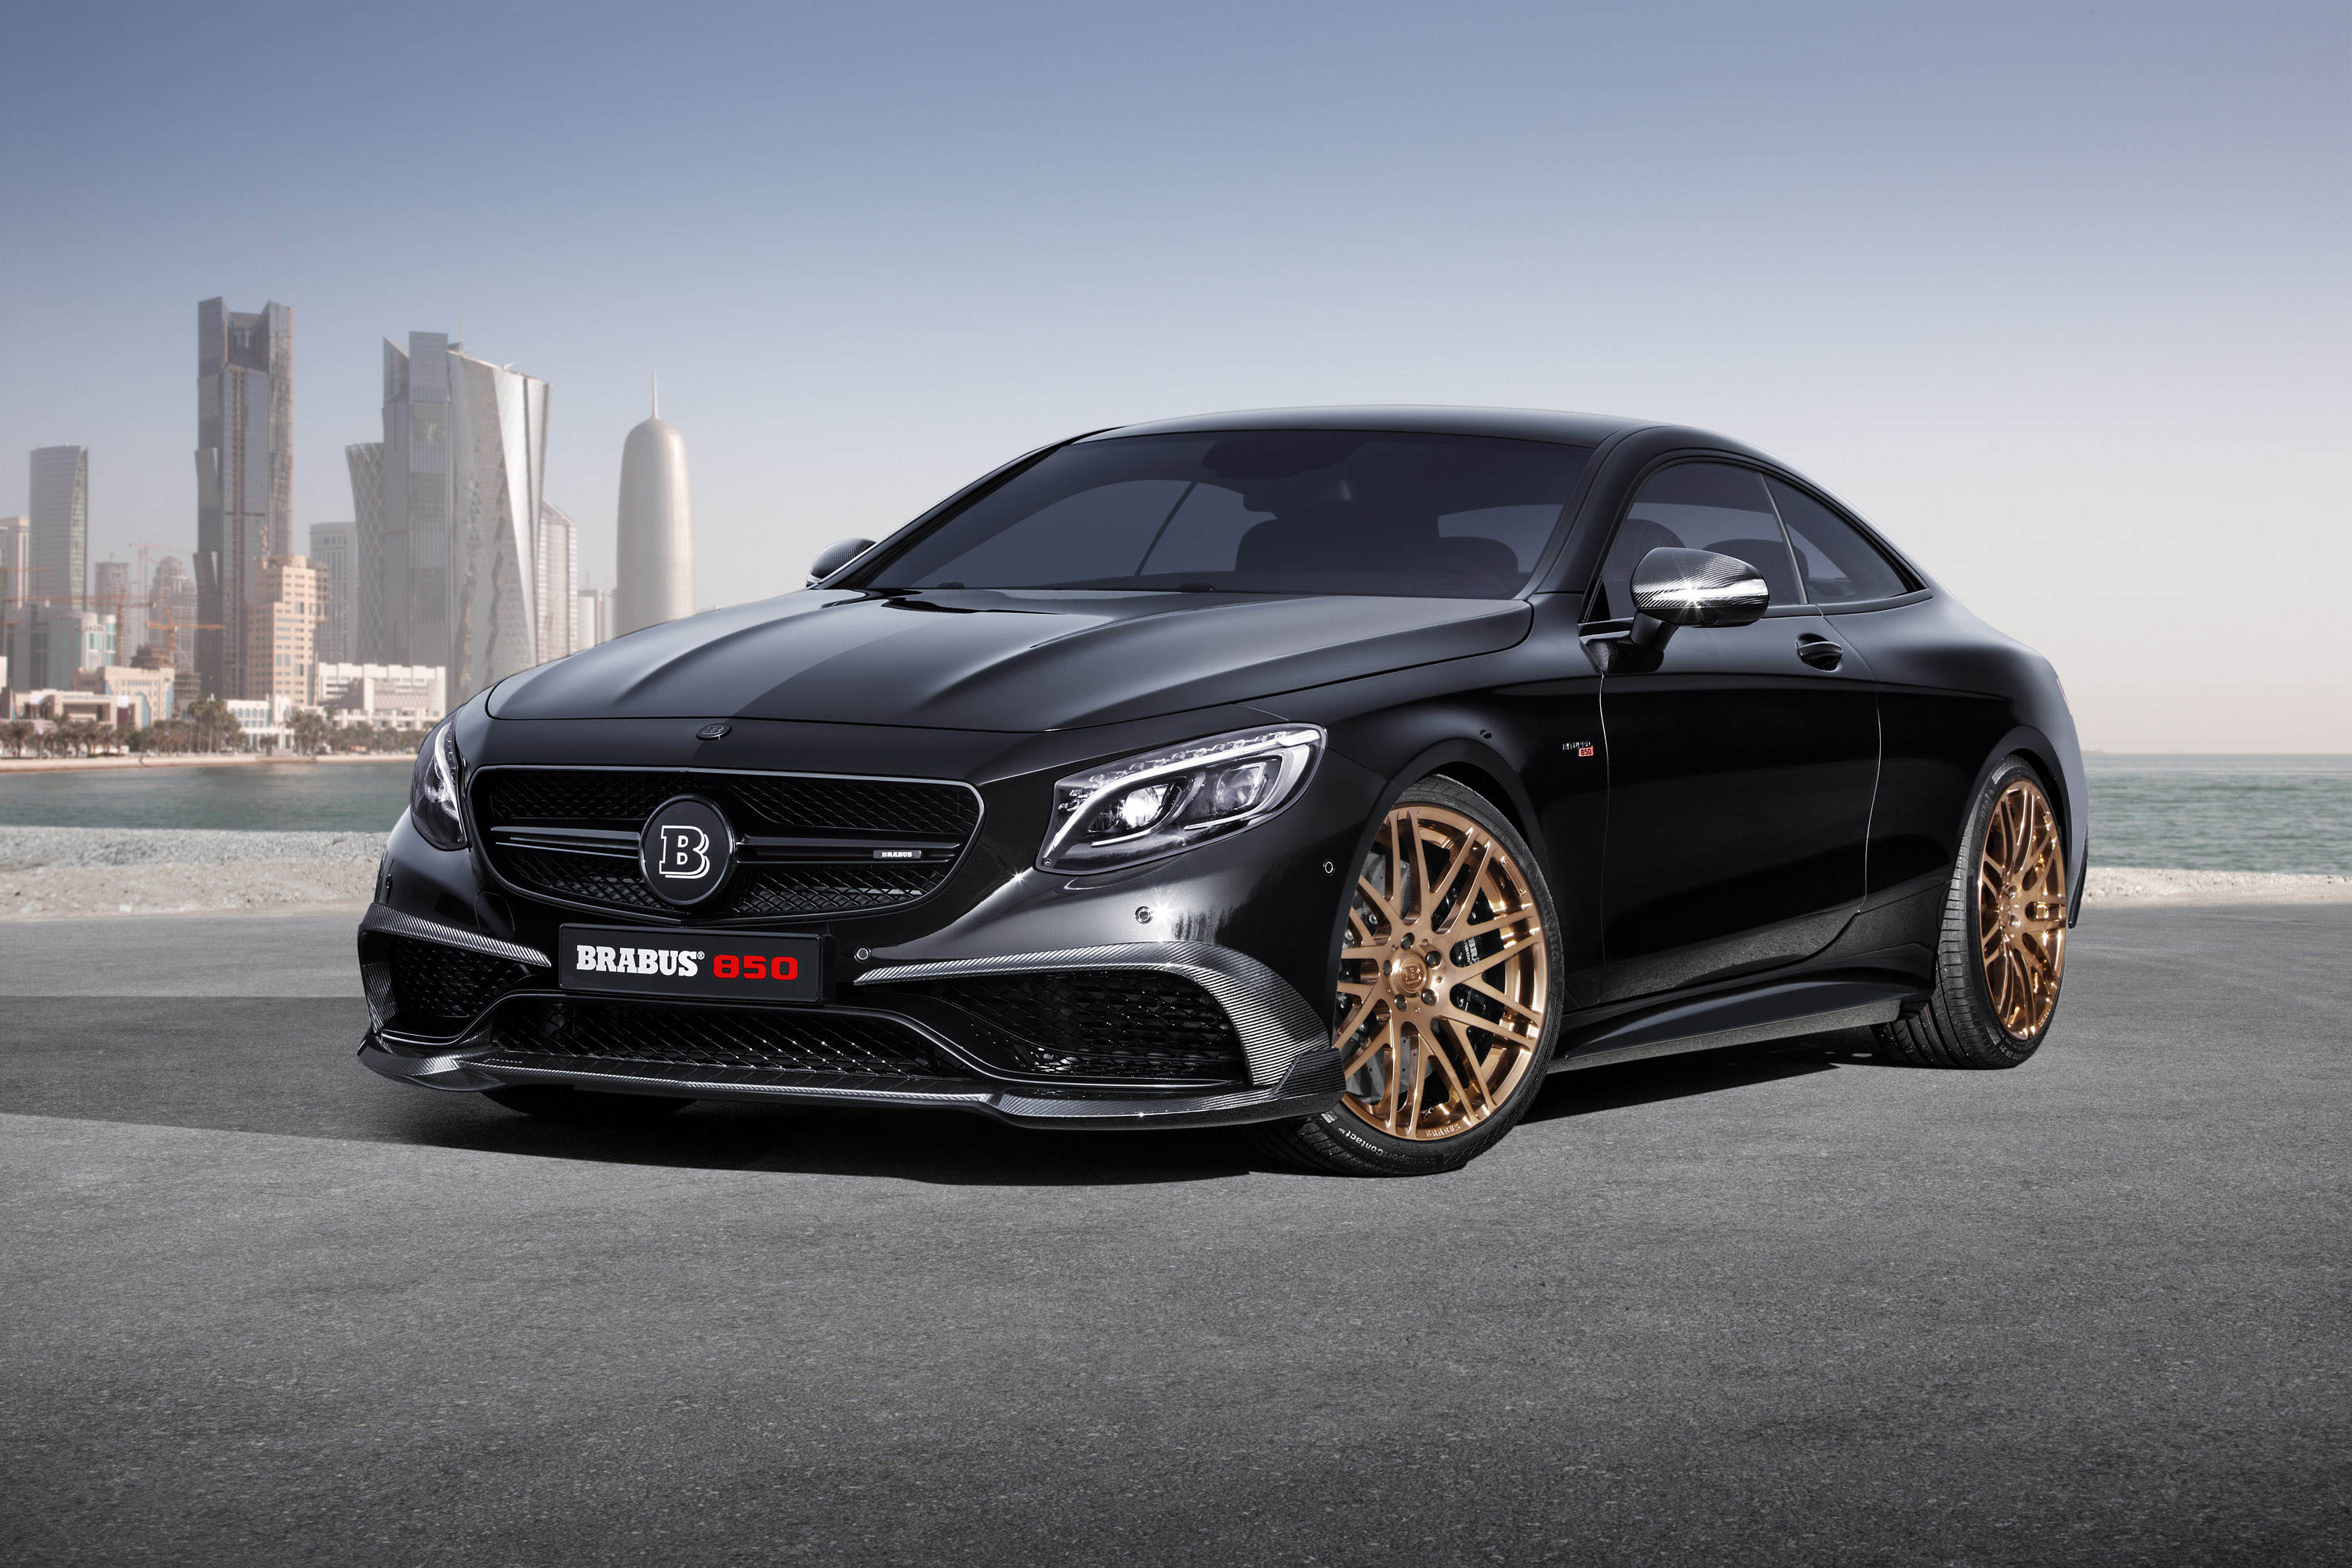 BRABUS 850: The Apex of Luxury and Performance in a V12 Sedan